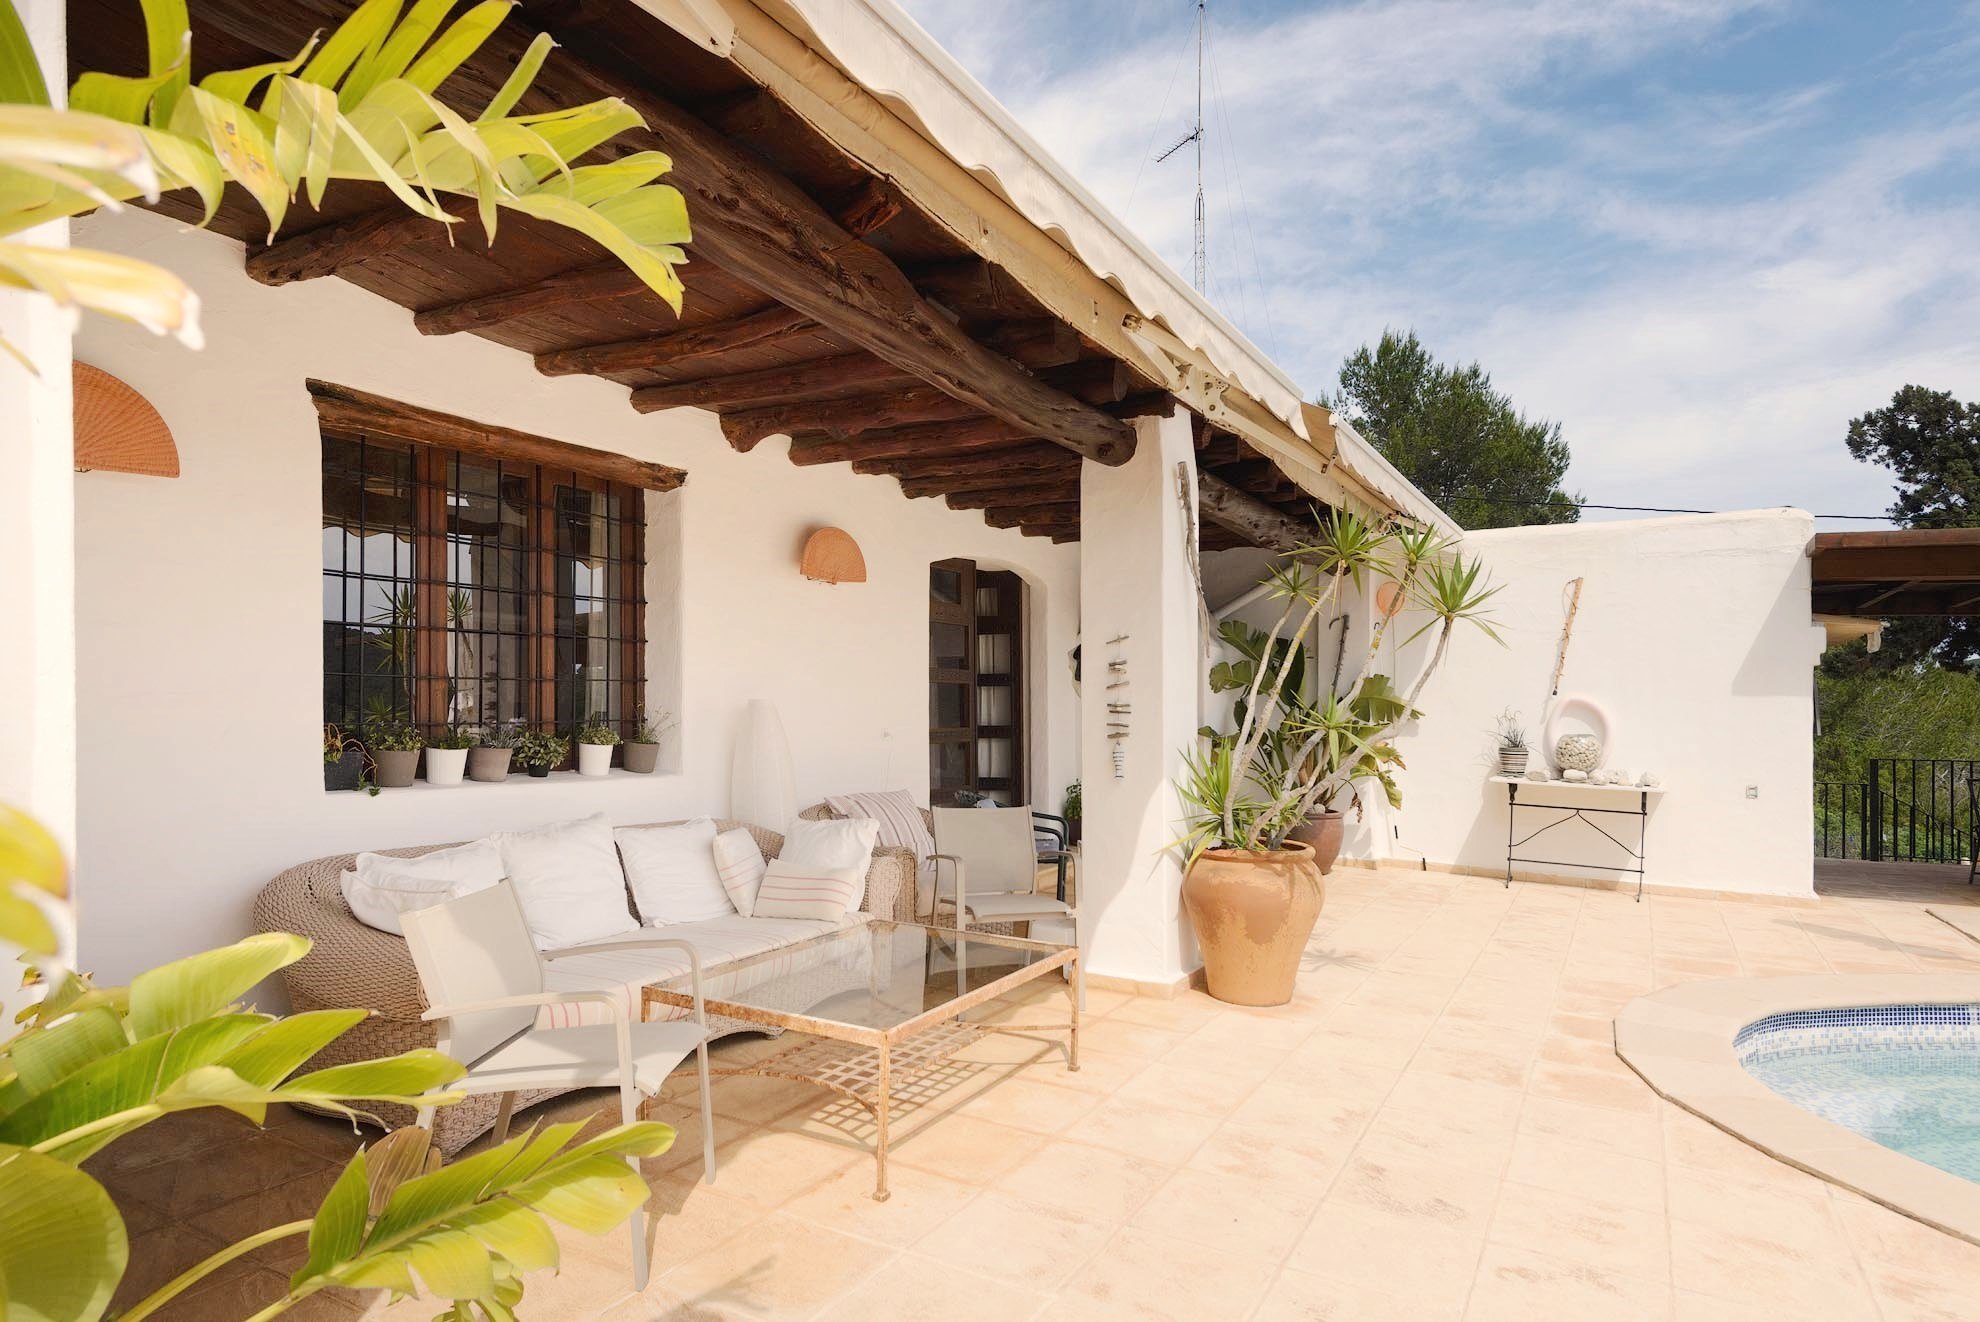 Spacious and bright villa in traditional Ibizan style with excellent views